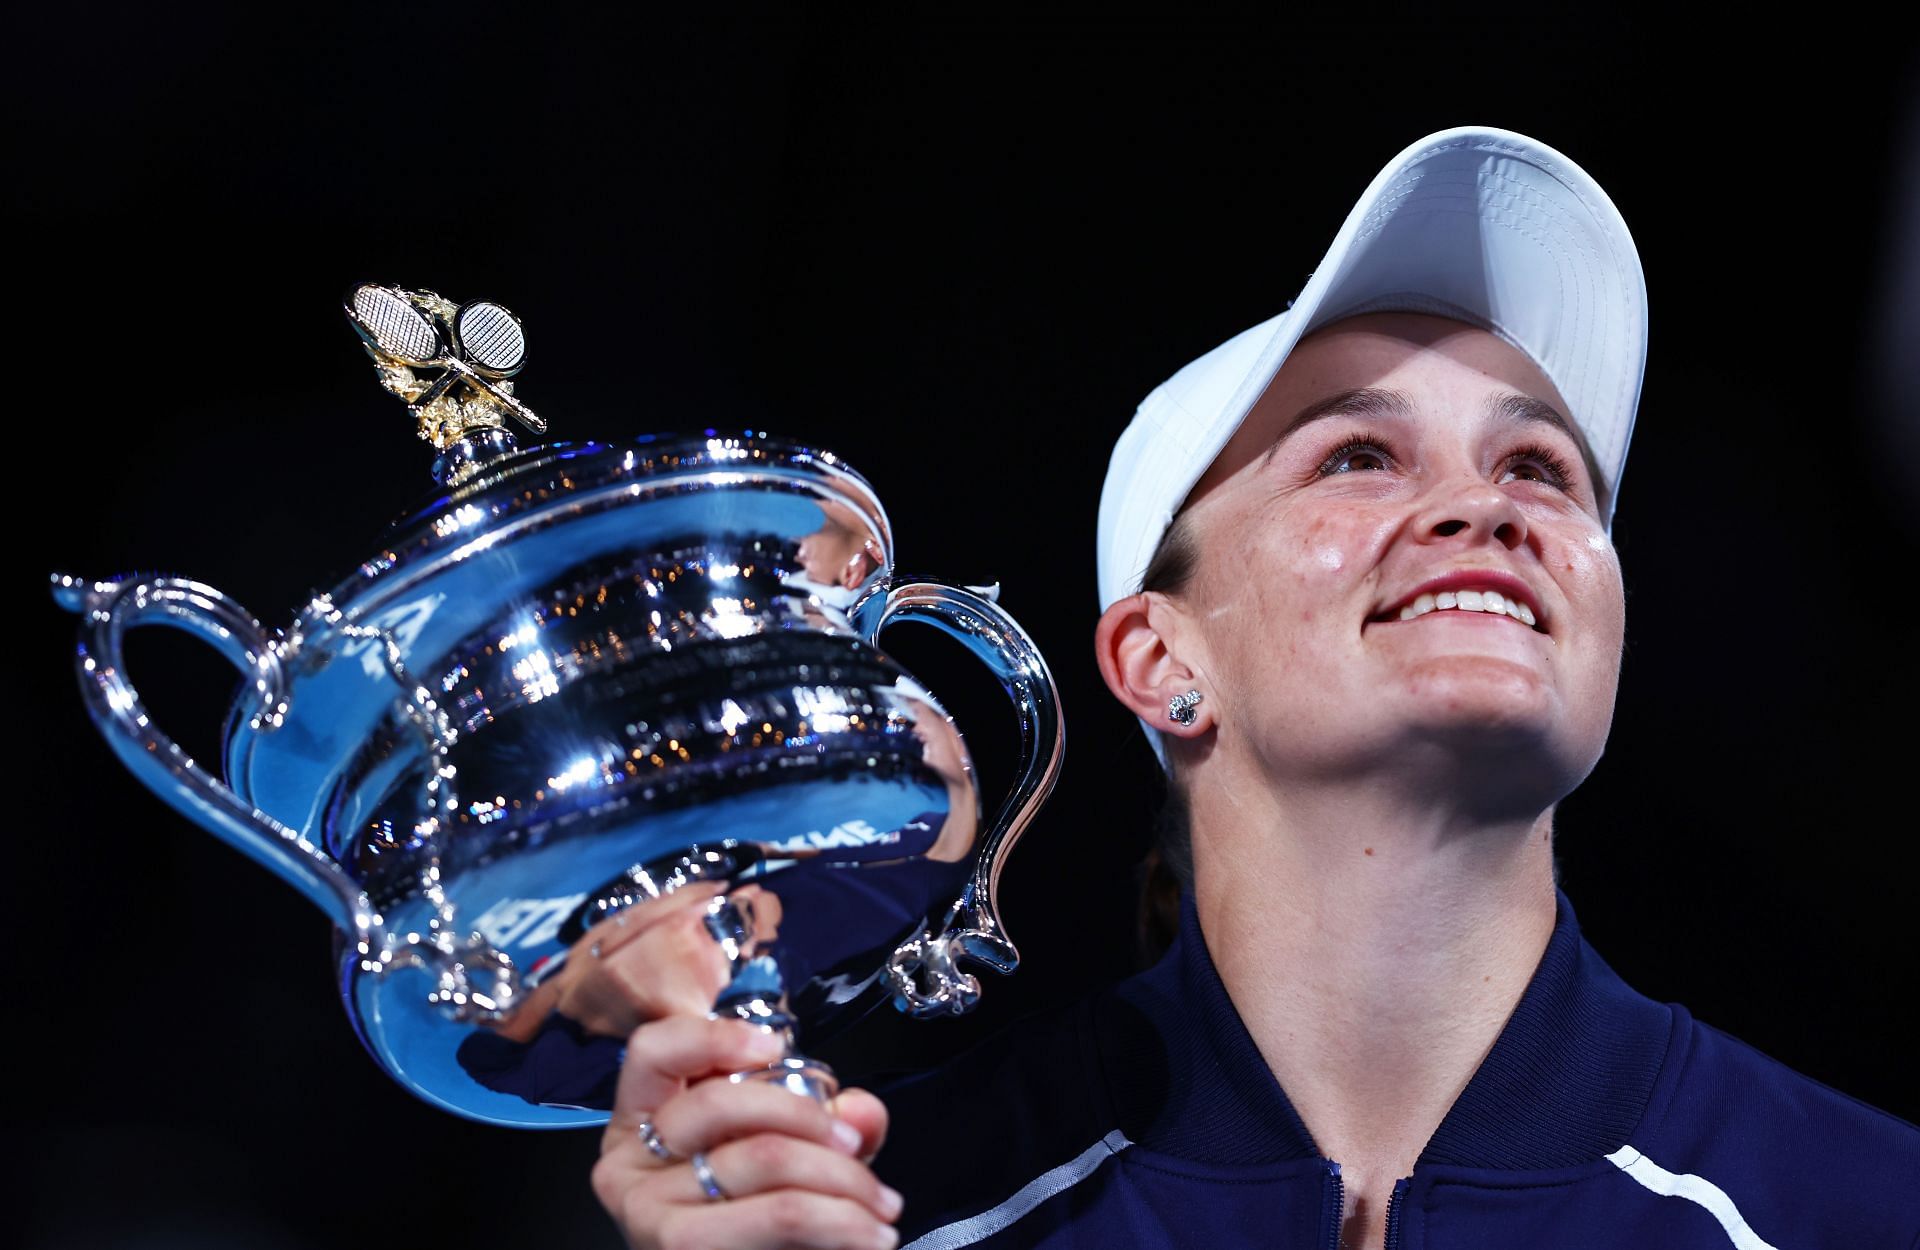 Ashleigh Barty wuth the 2022 Australian Open title